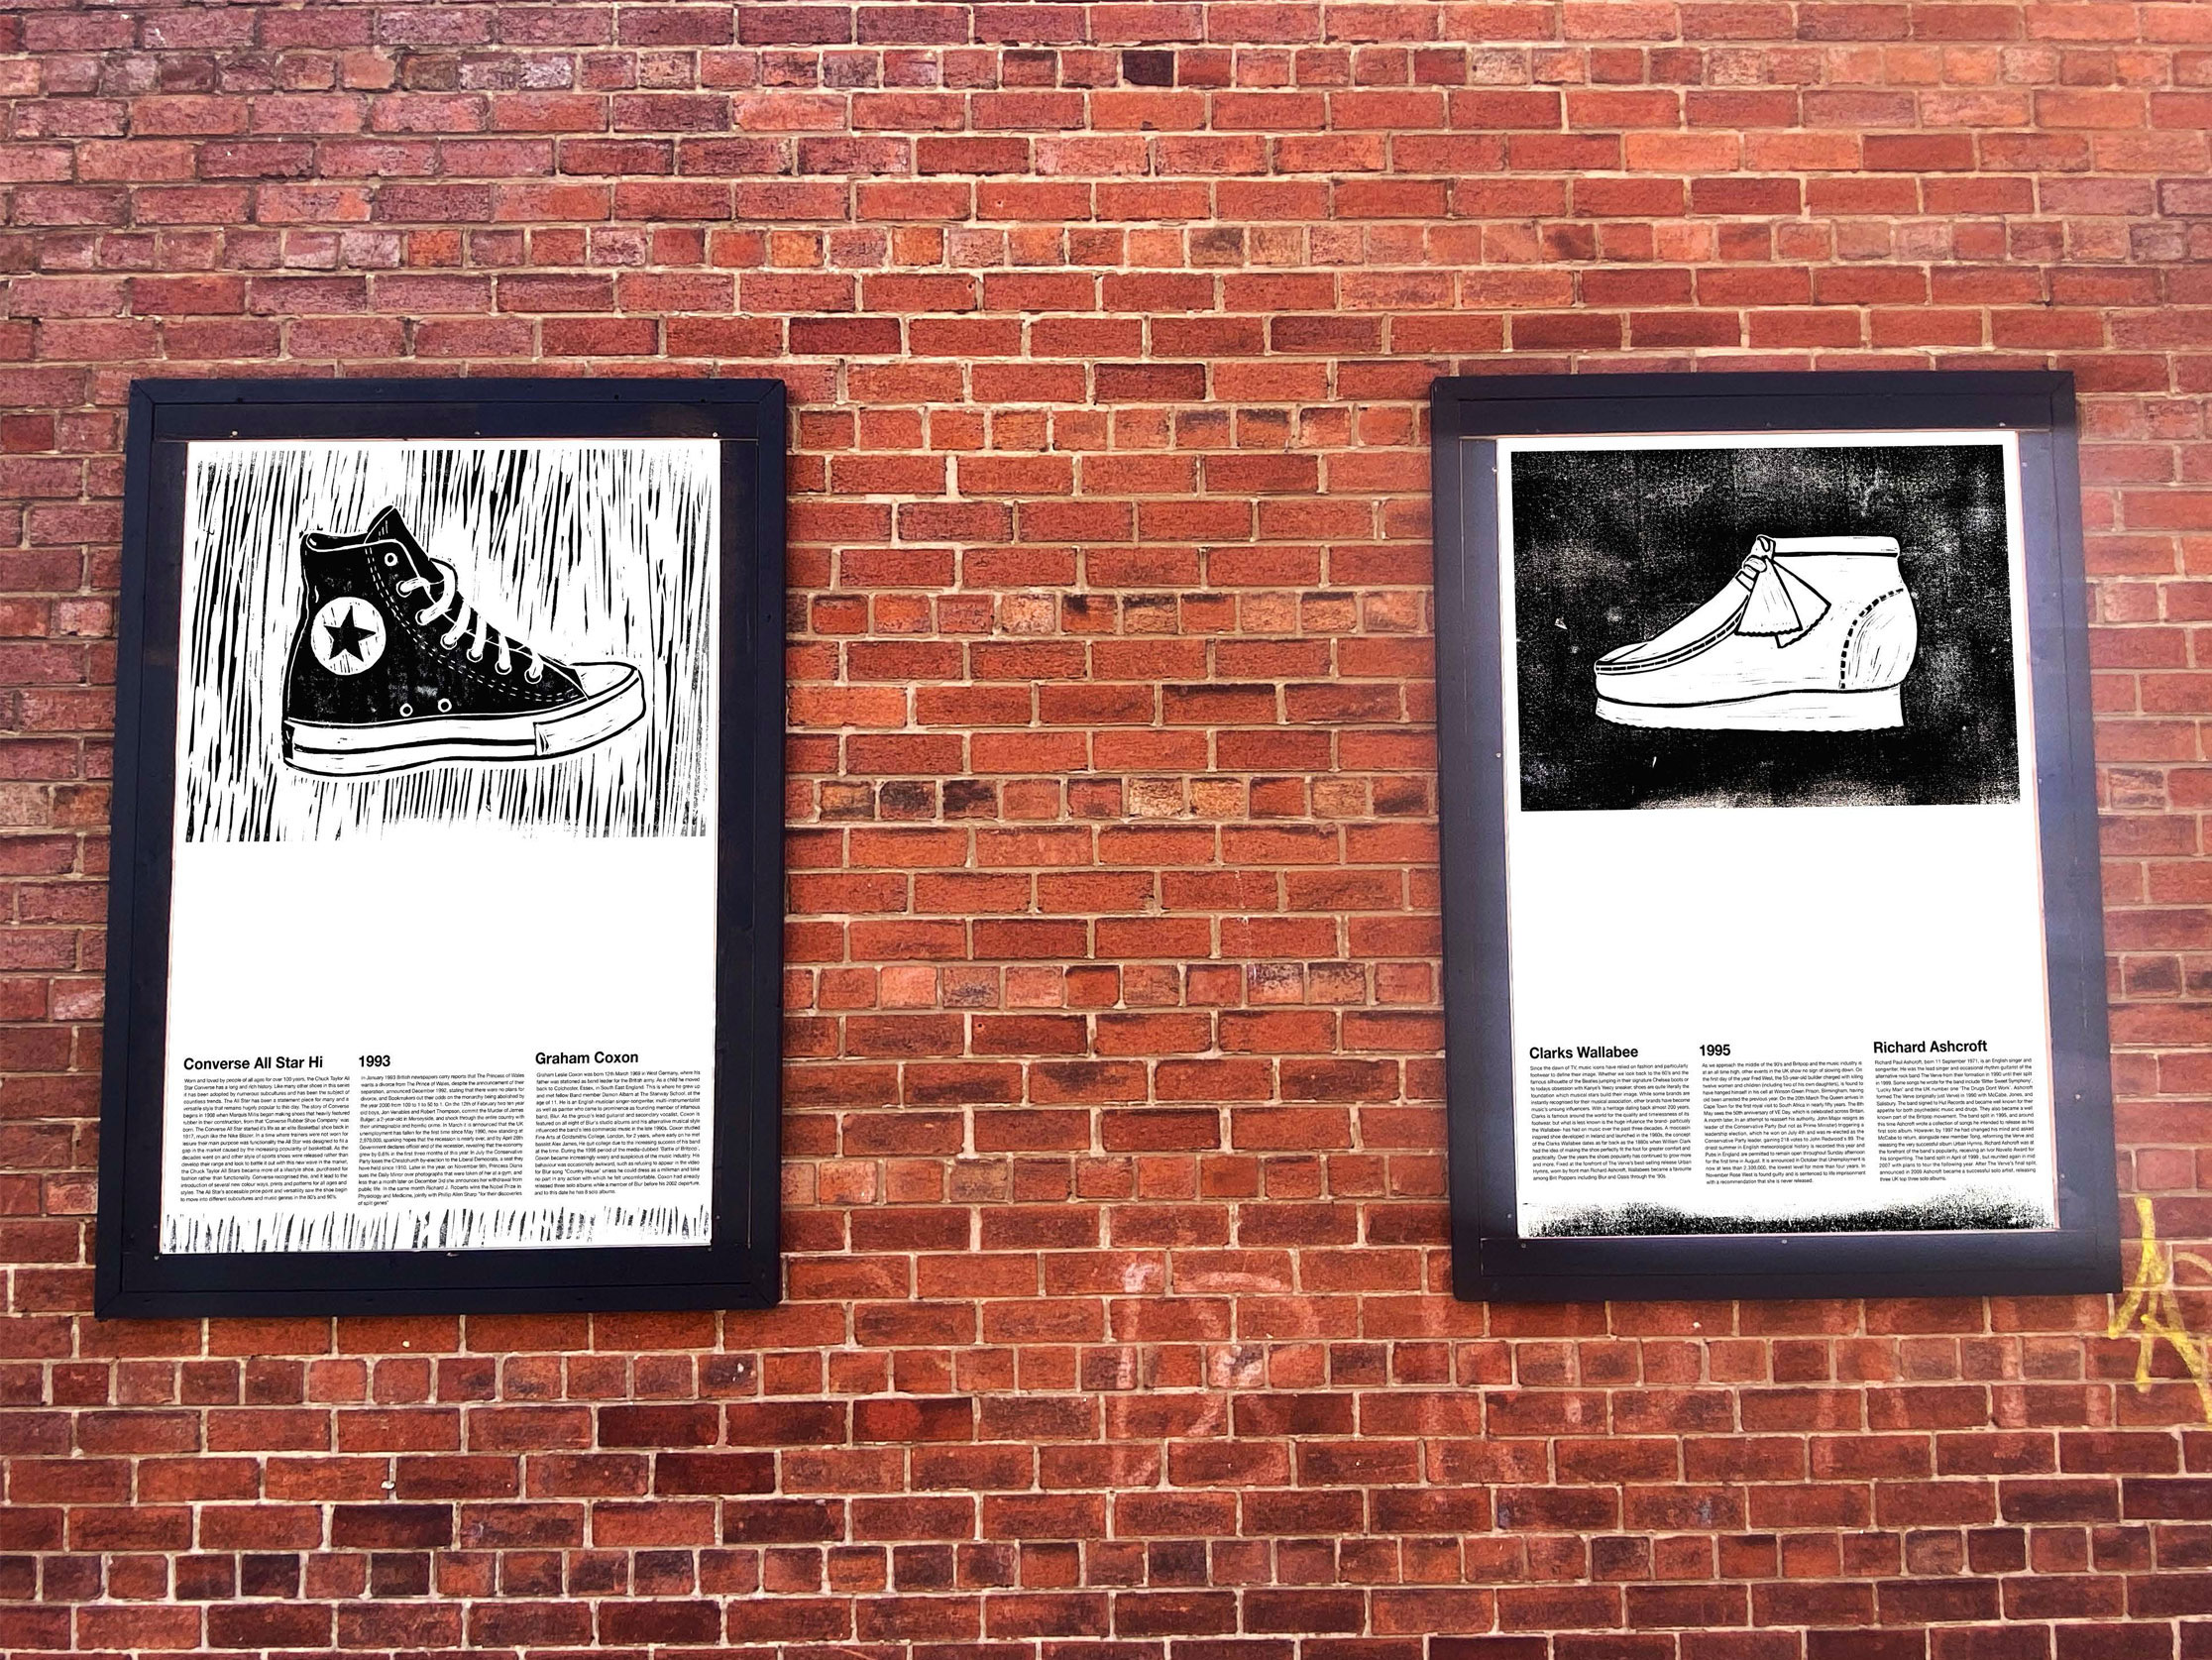 Mock-up photograph, poster in situ, linocut prints of Converse Allstars and Clarks Wallabees